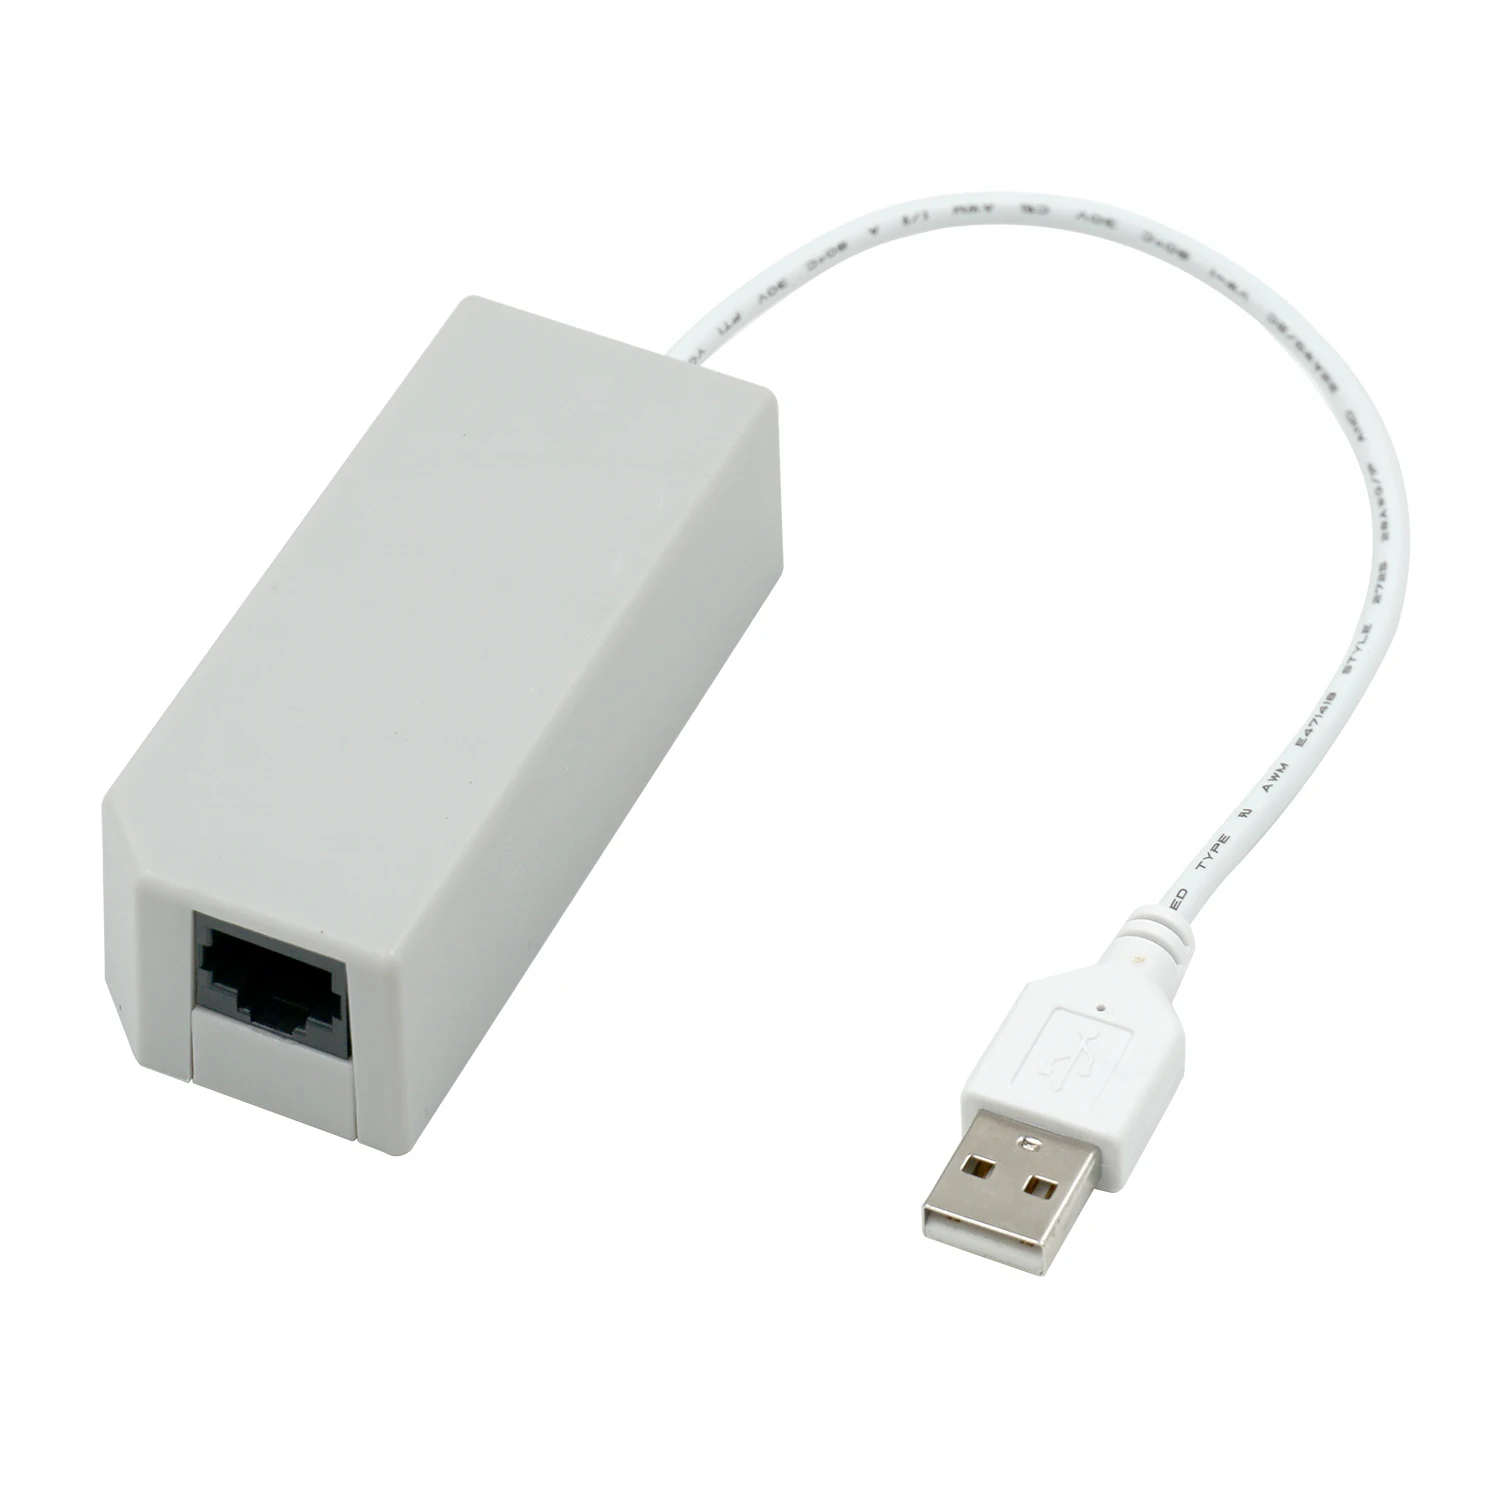 Usb Lan Adapter For Wii U For Wii Gray Buy Usb Lan Adapter For Wii Gray Usb Lan Adapter For Wii U Gray Usb Lan Adapter For Wii U For Wii Gray Product